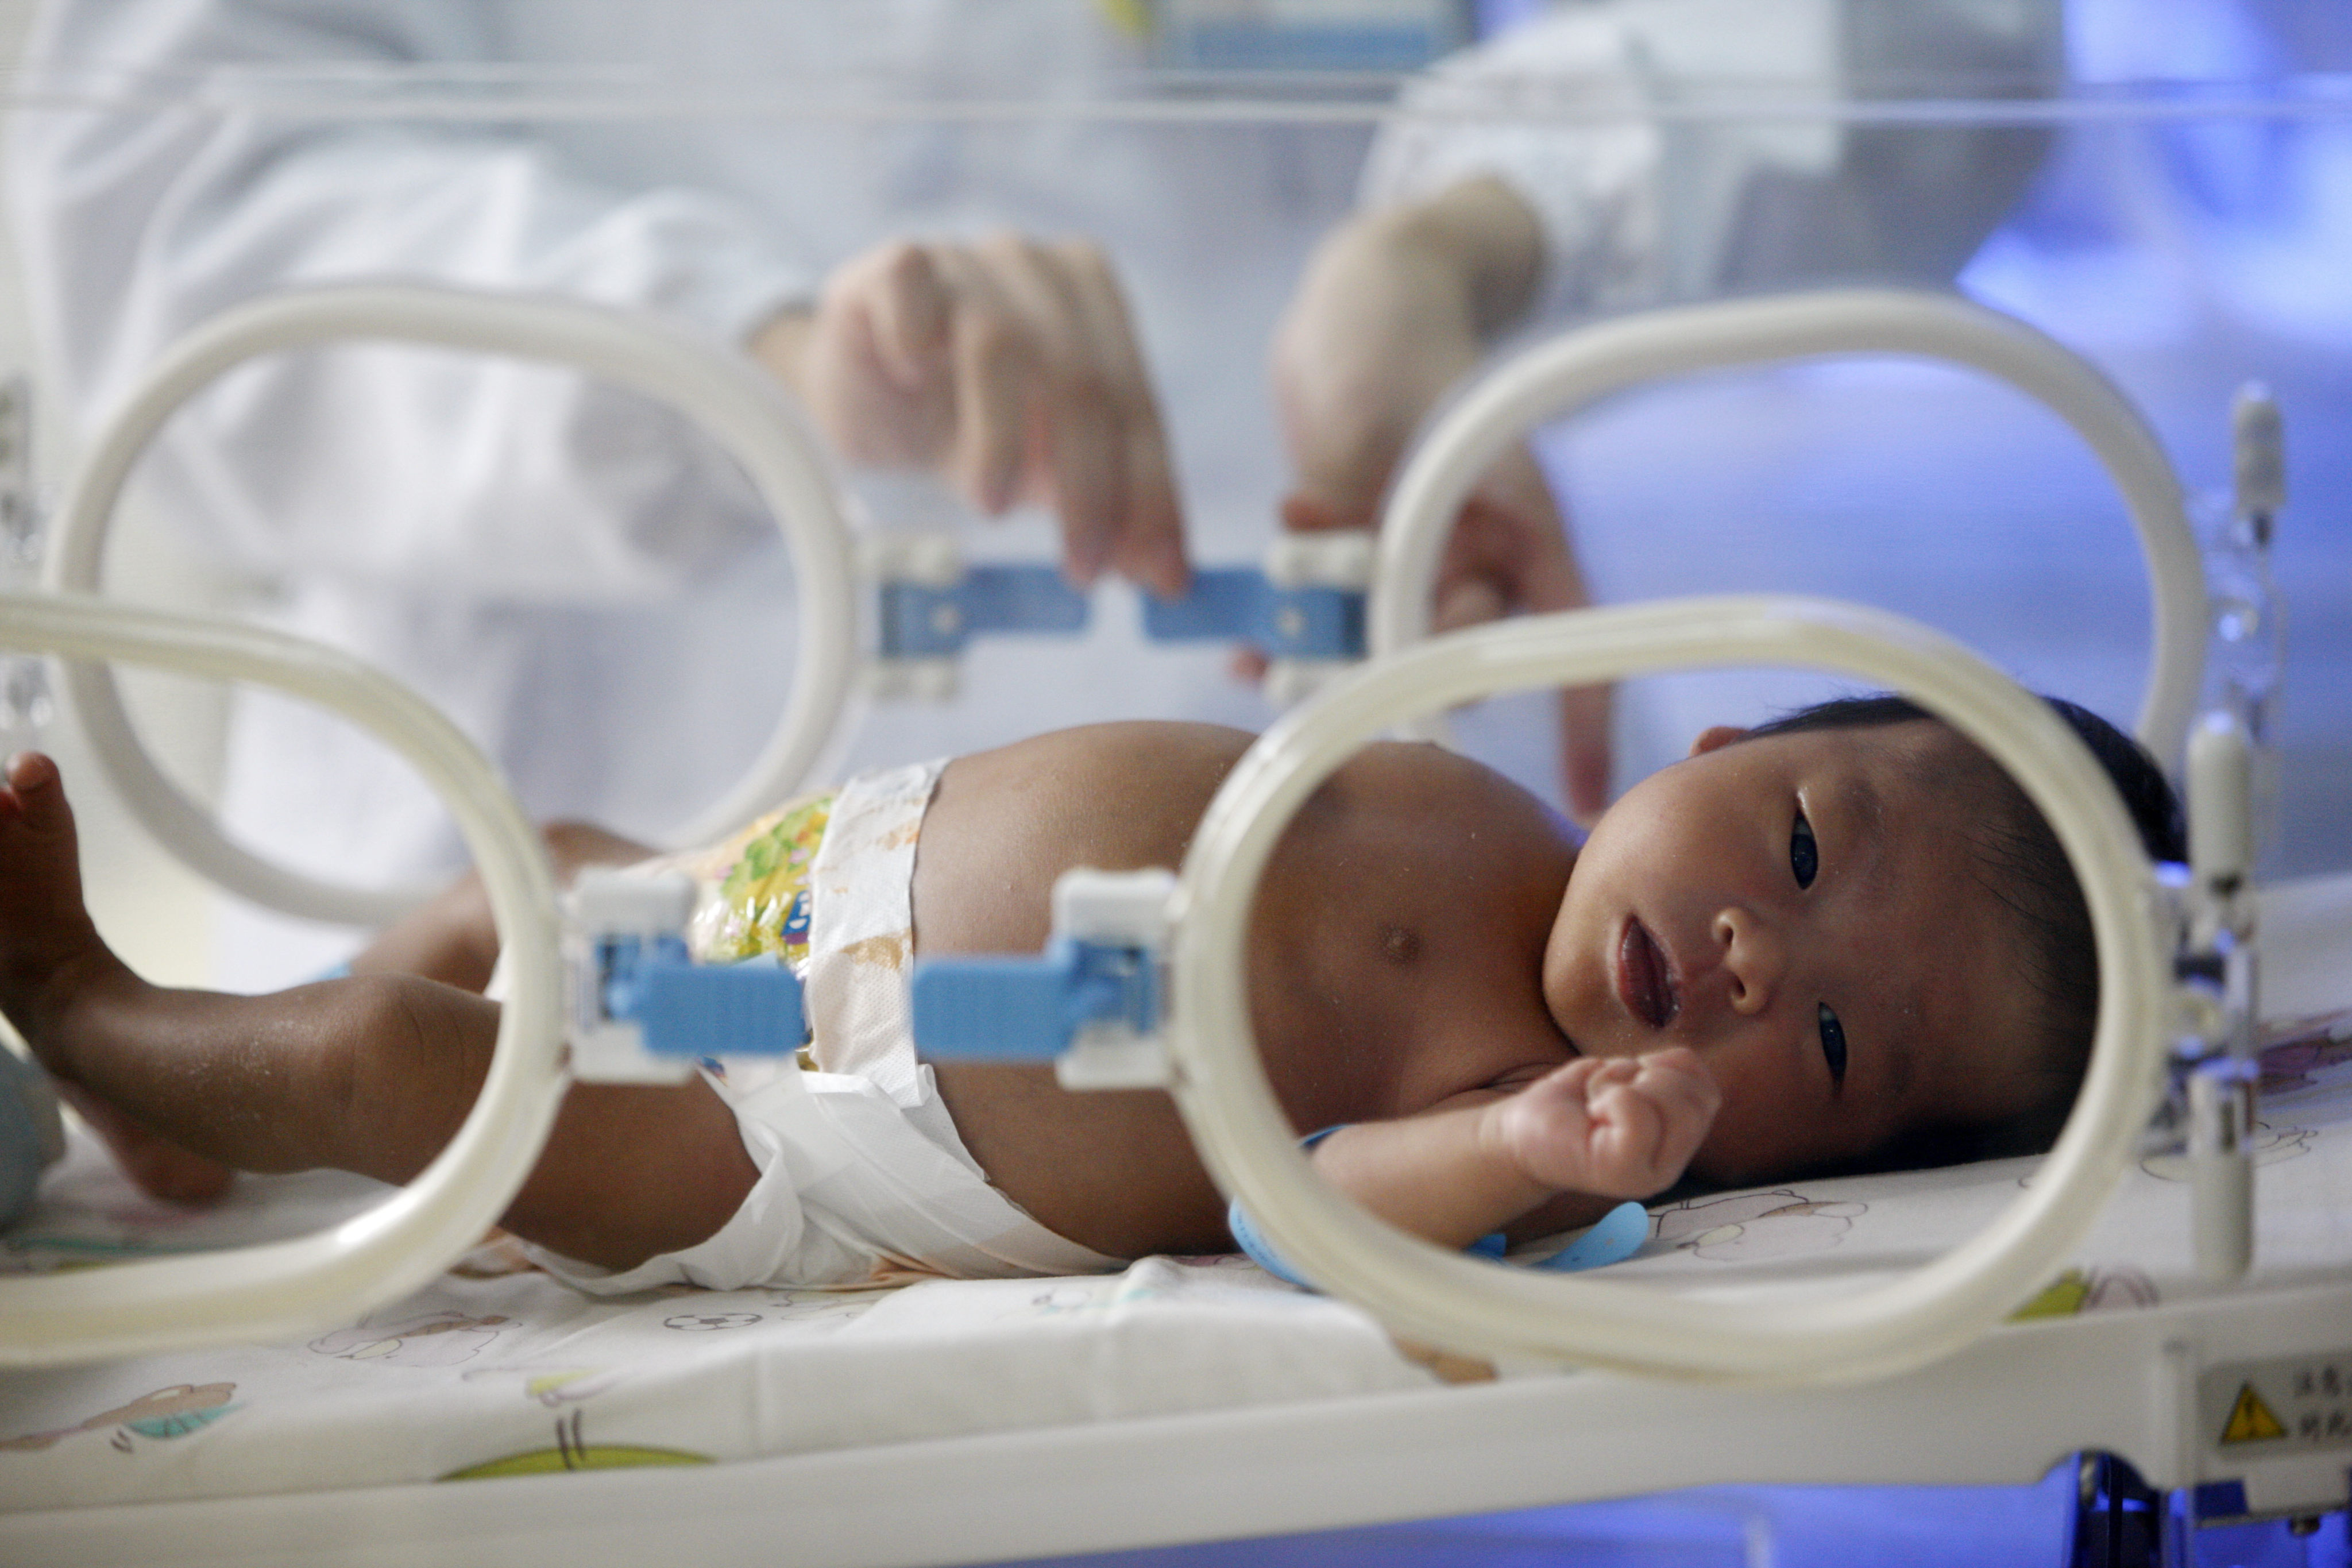 China’s demographic shifts have not yet been reversed by policies designed to increase births in the country. Photo: Shutterstock